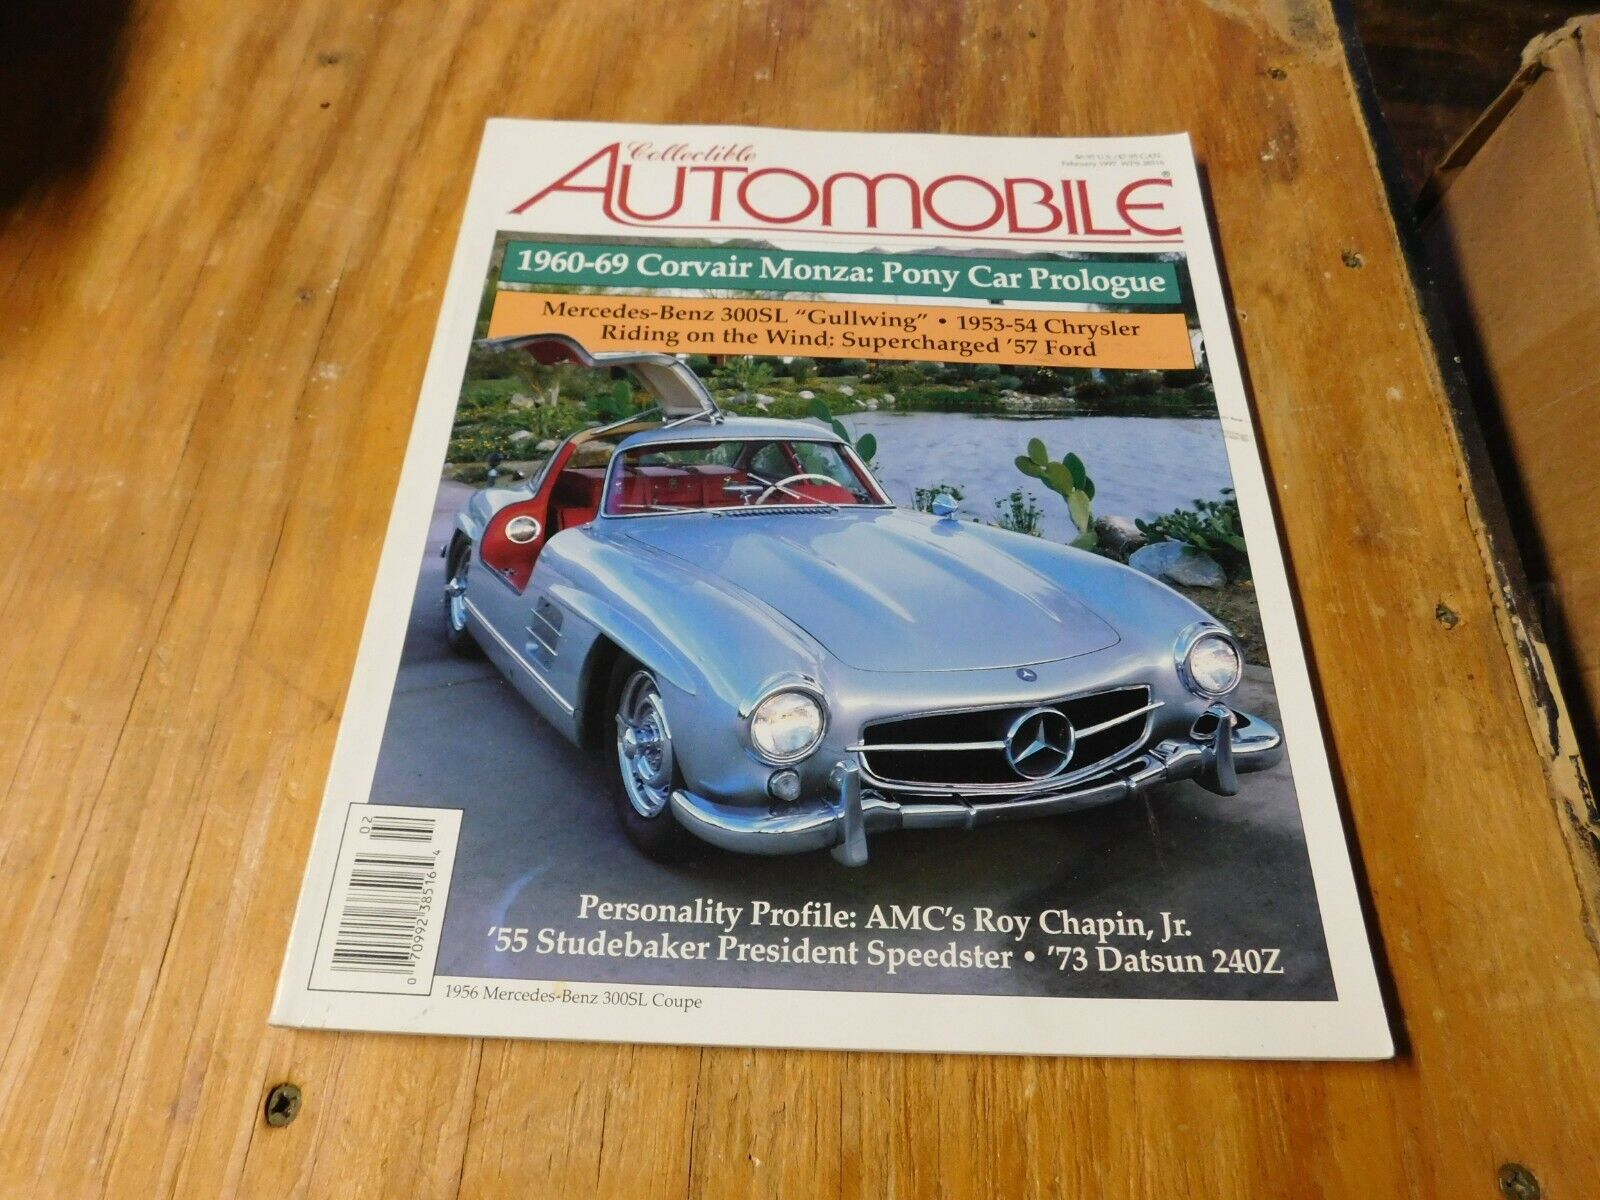 Collectible Automobile Magazine February 1997 : 60-69 Corvair Monza Pony Car